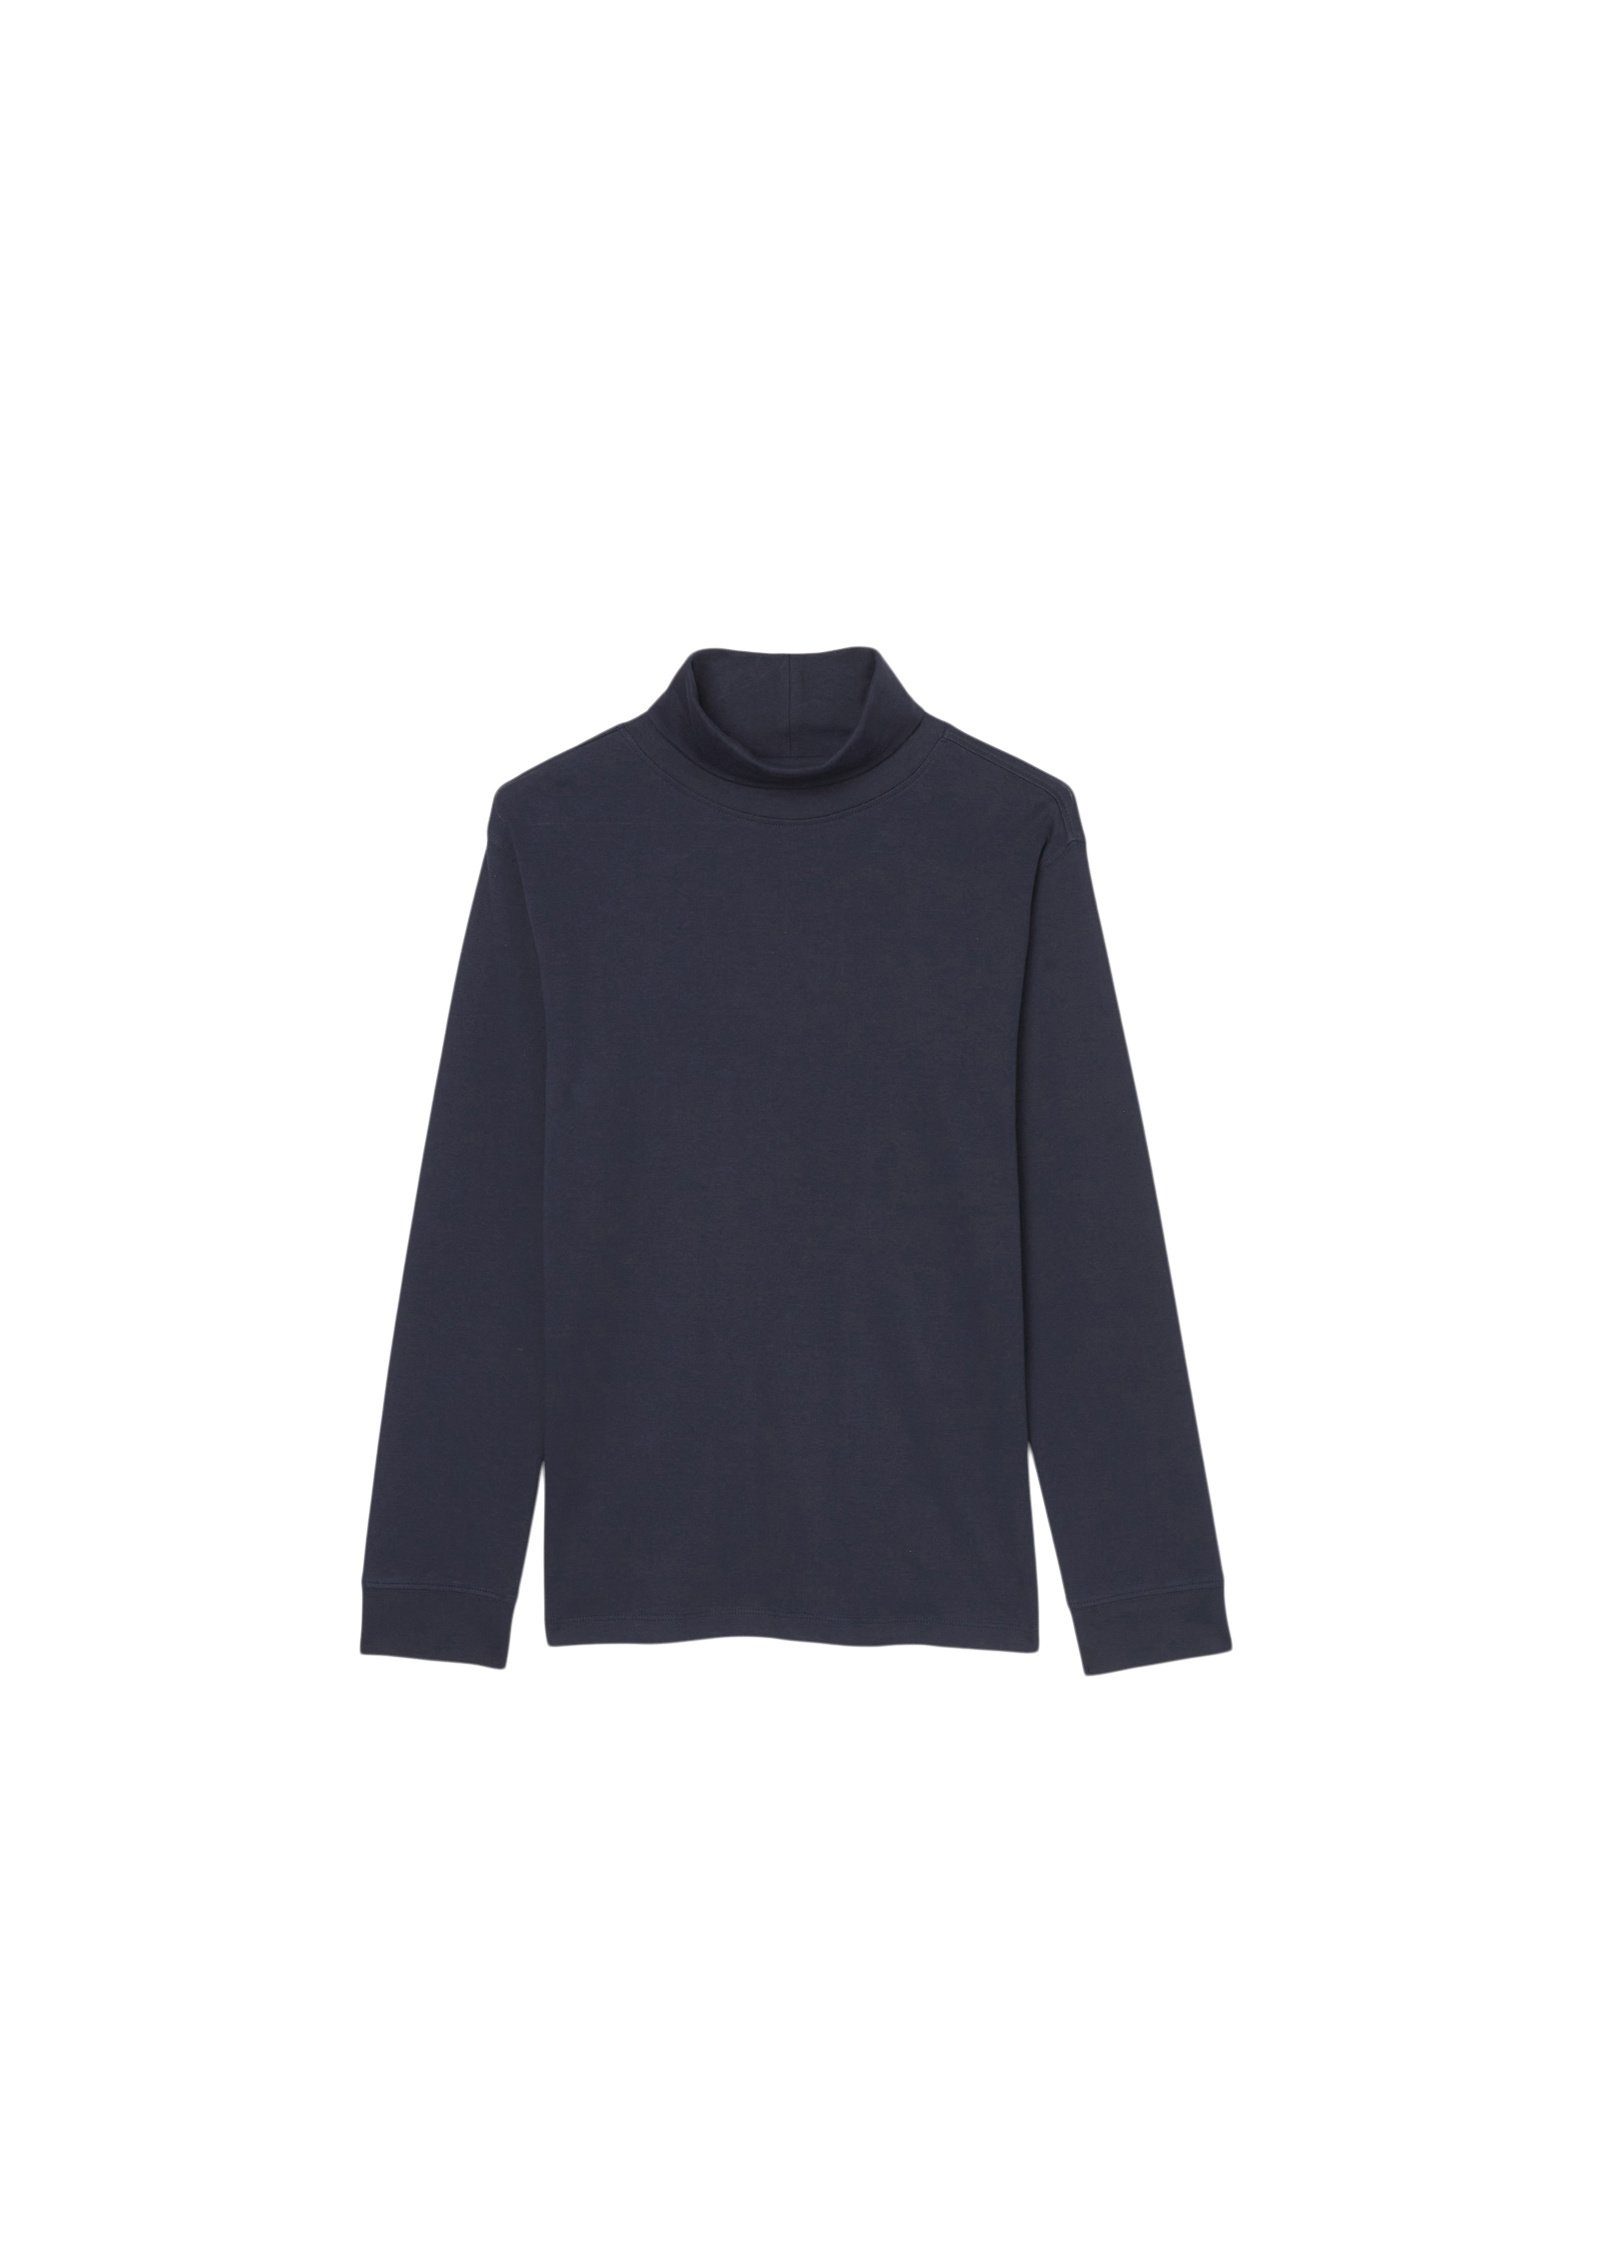 Marc O'Polo Strickpullover in blau softer Jersey-Qualität